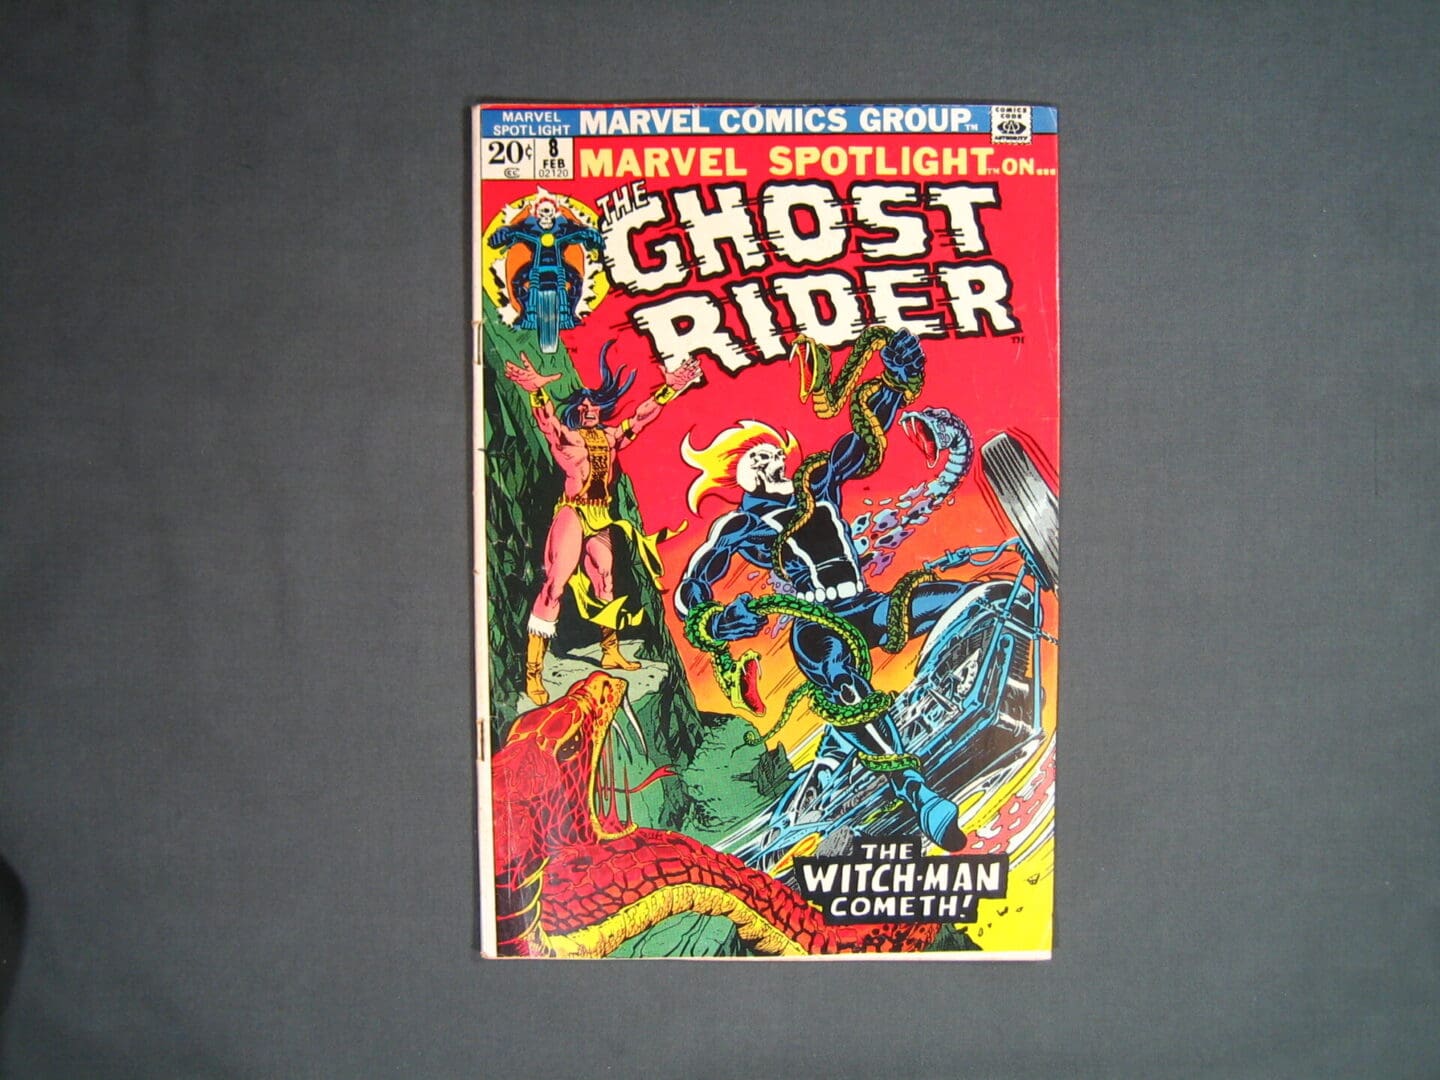 A Marvel Spotlight #8 comic book featuring the Ghost Rider and Witch-Woman on the cover.